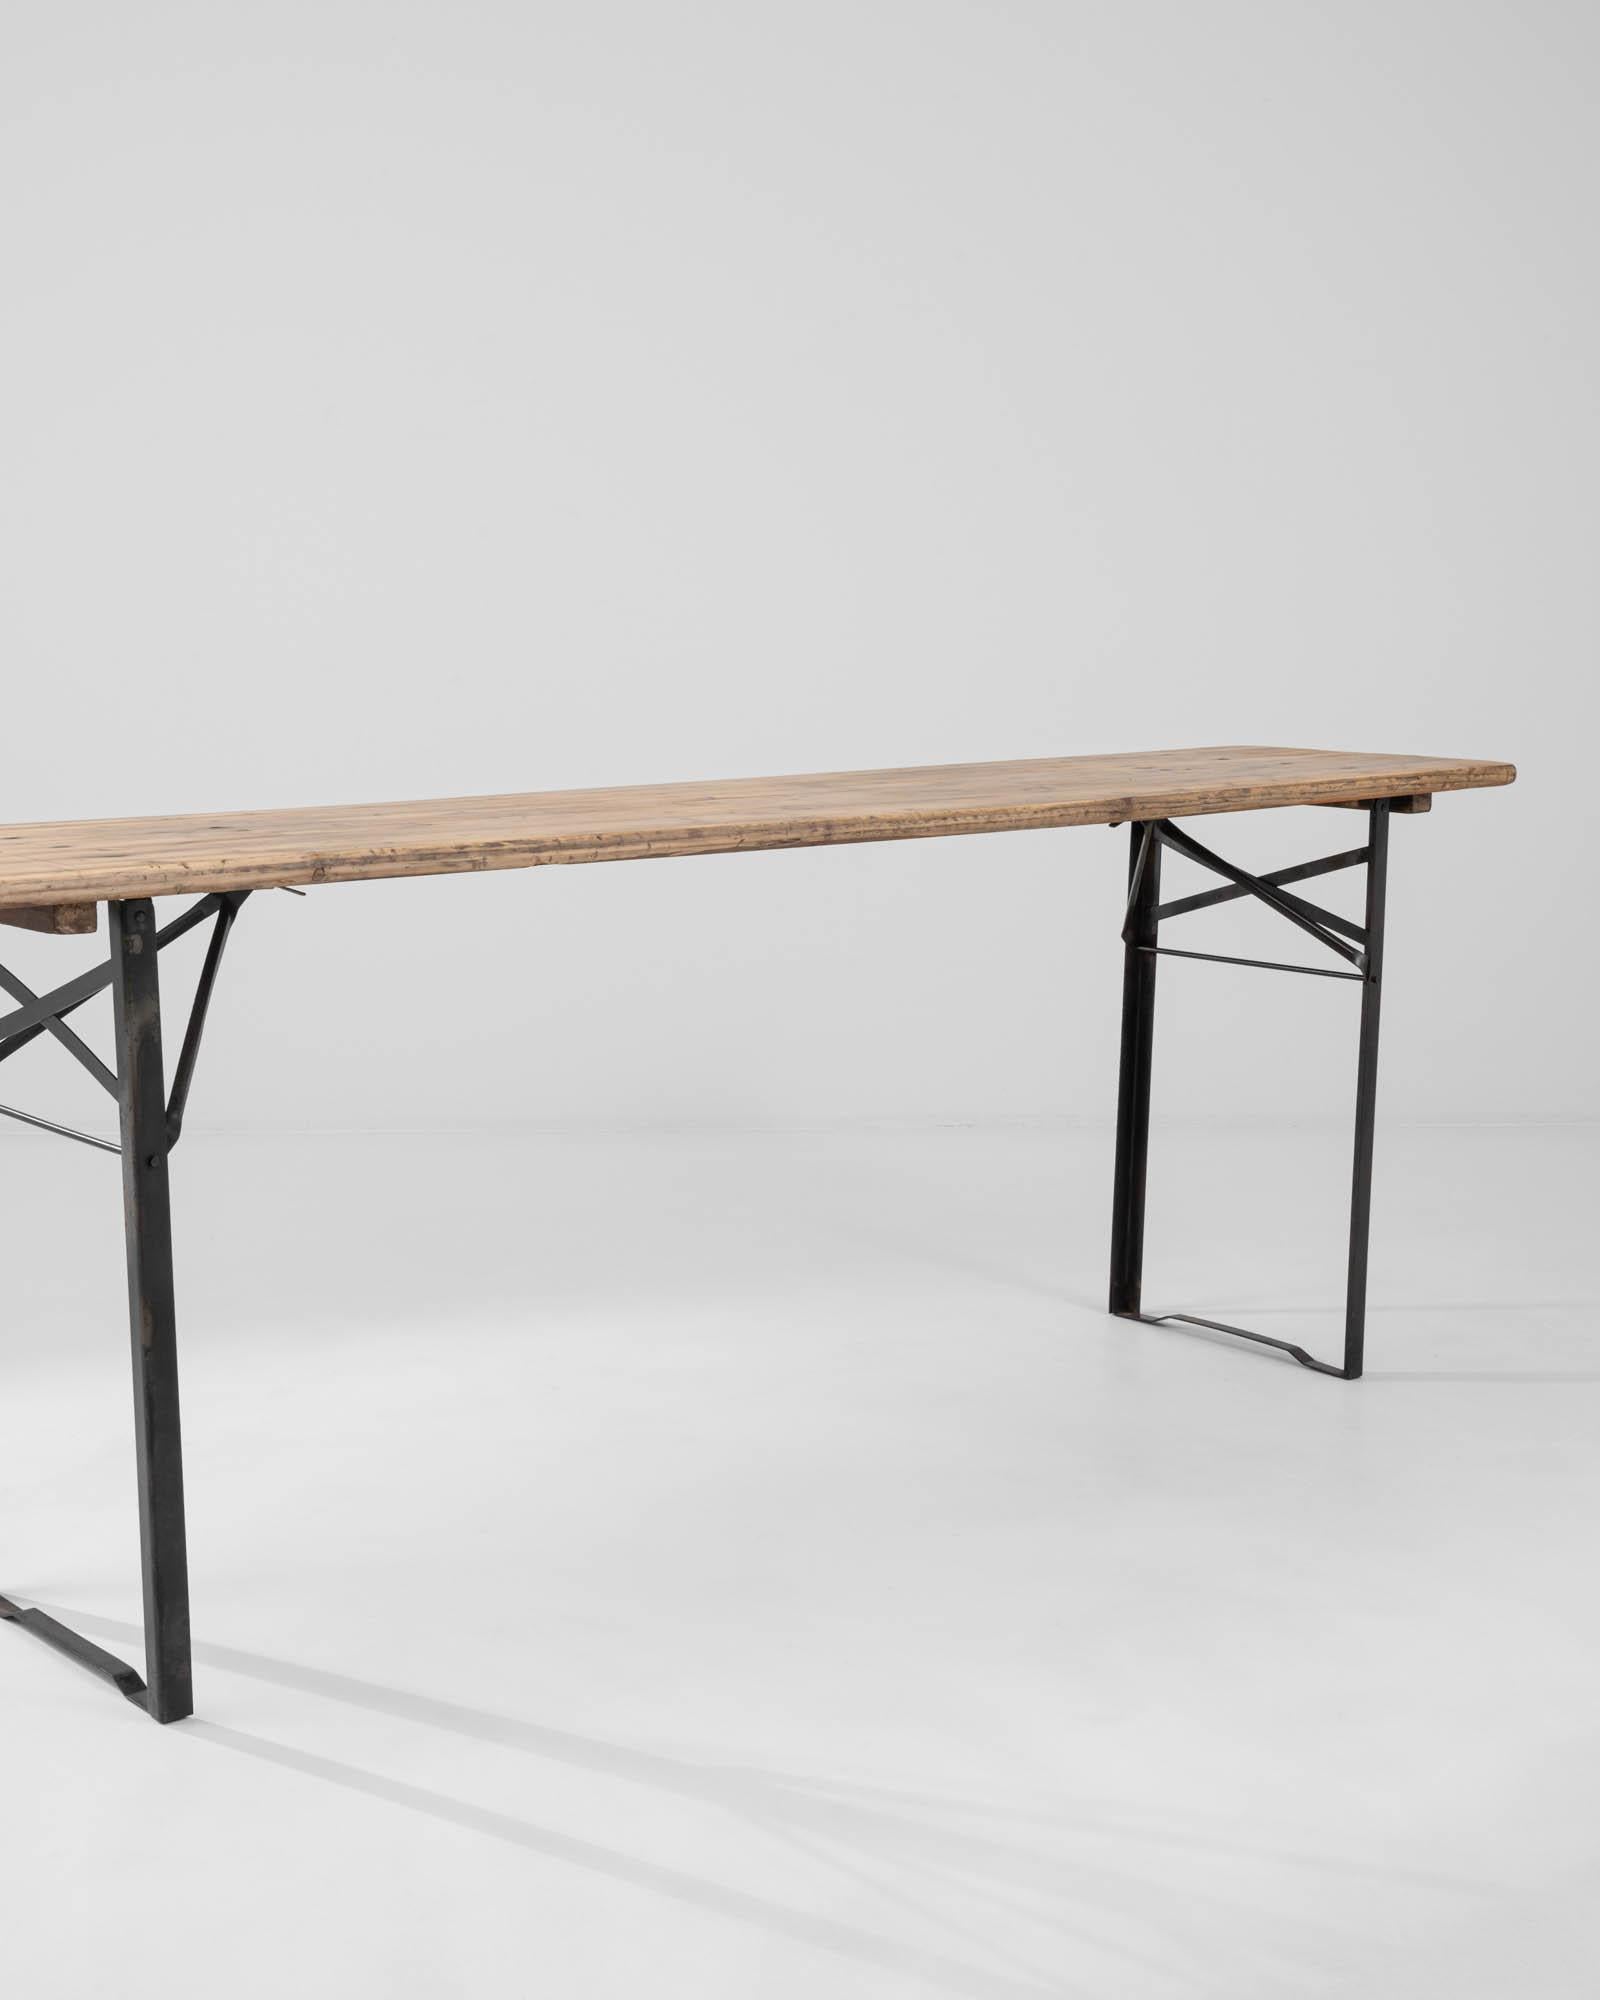 20th Century French Metal and Wood Folding Table  For Sale 2